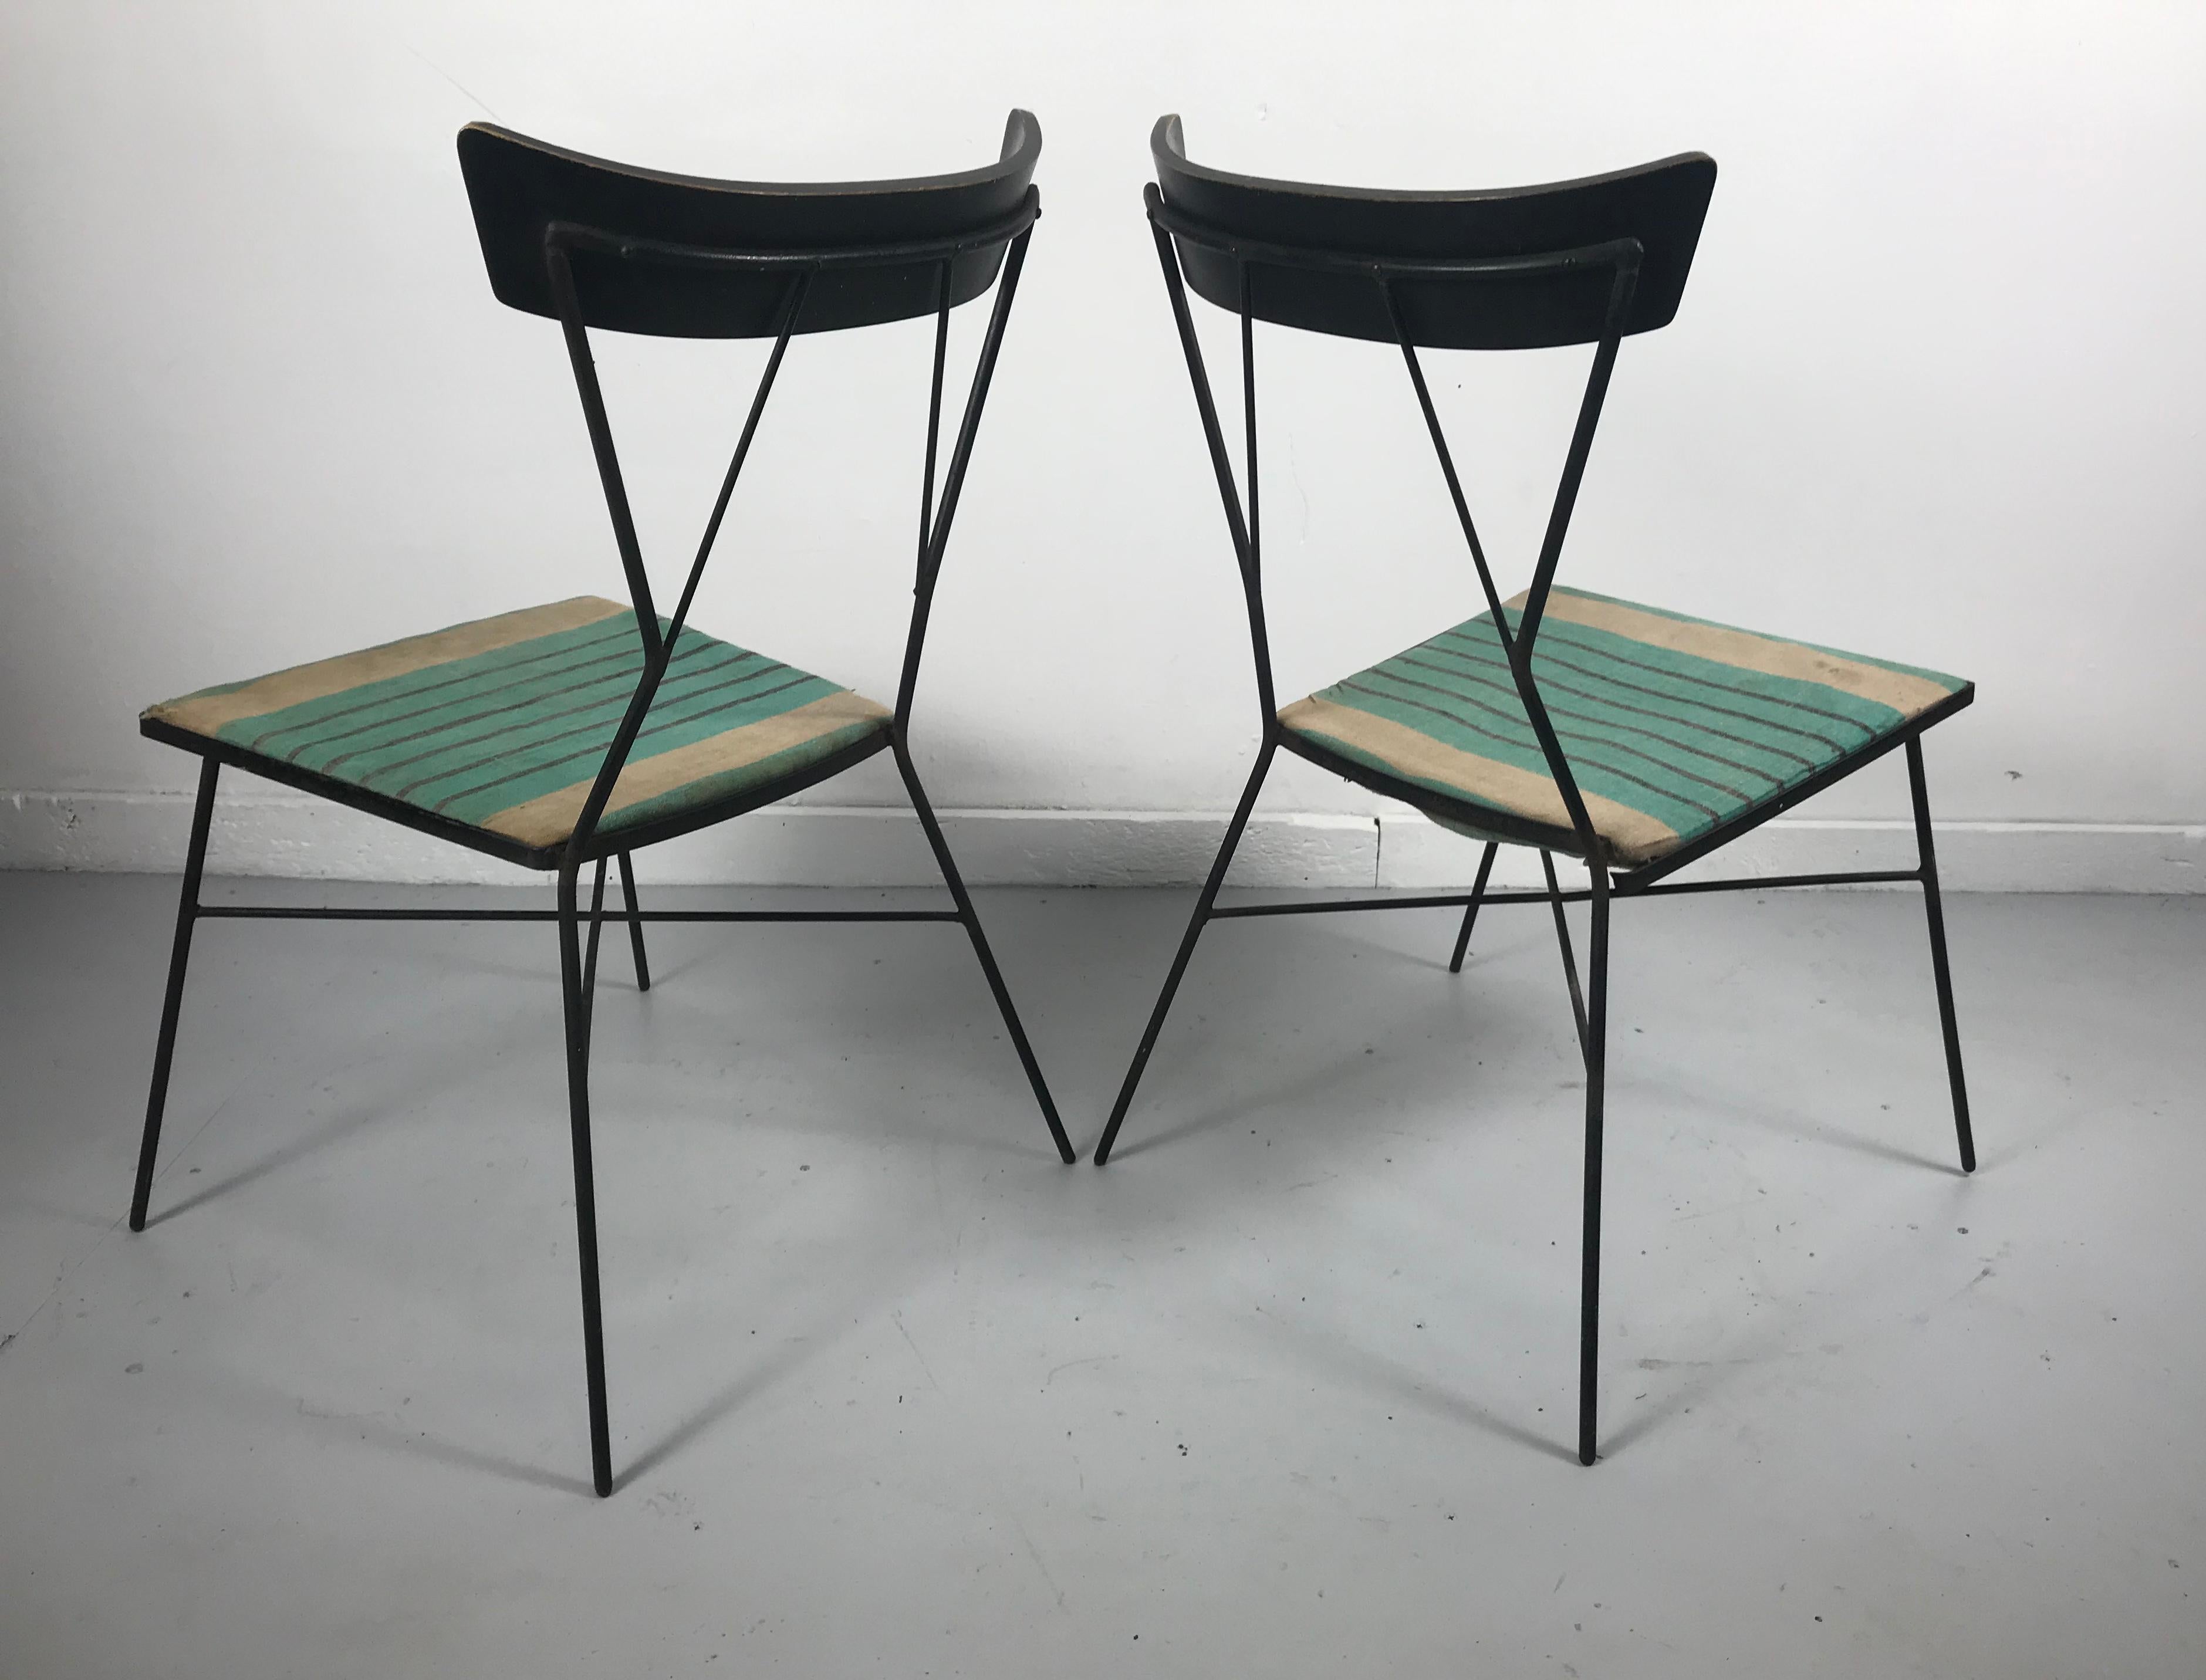 Rare Group 76 Chairs by Paul McCobb for Arbuck 1